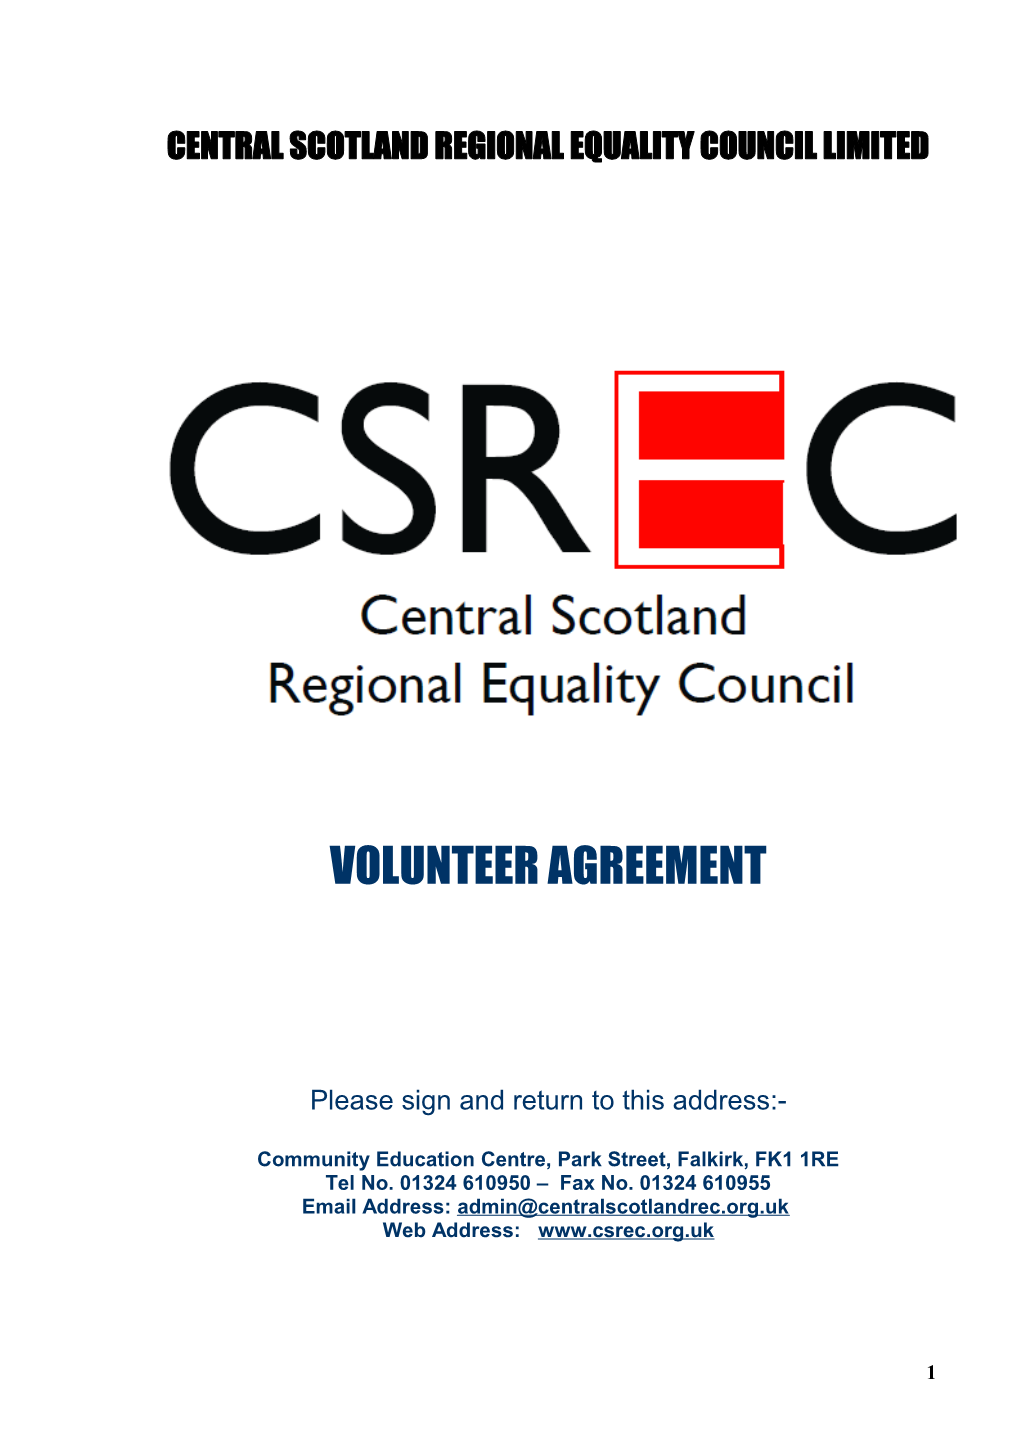 Central Scotland Regional Equality Council Limited